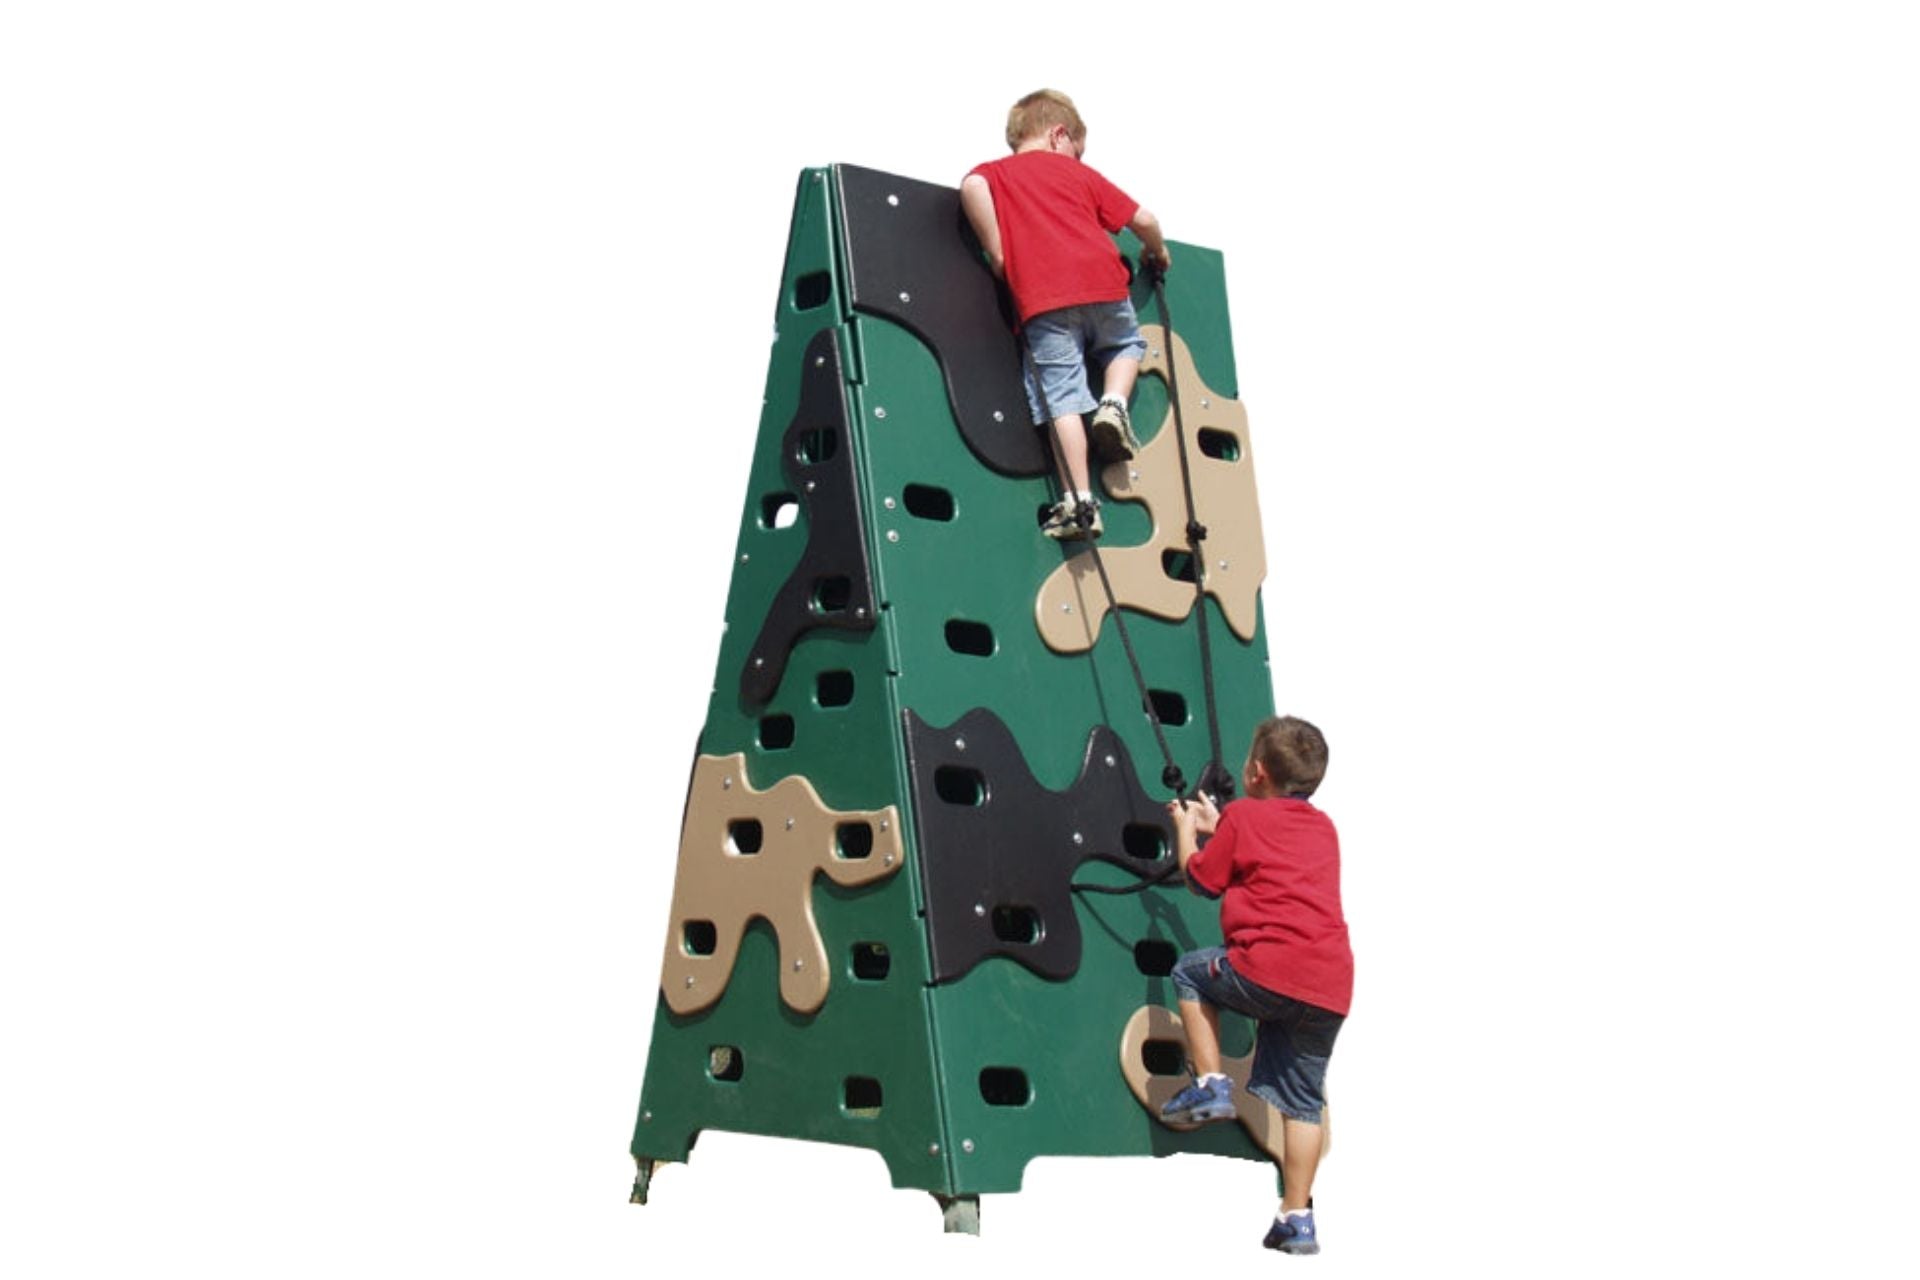 Camo Climber Challenge Fitness Course Section